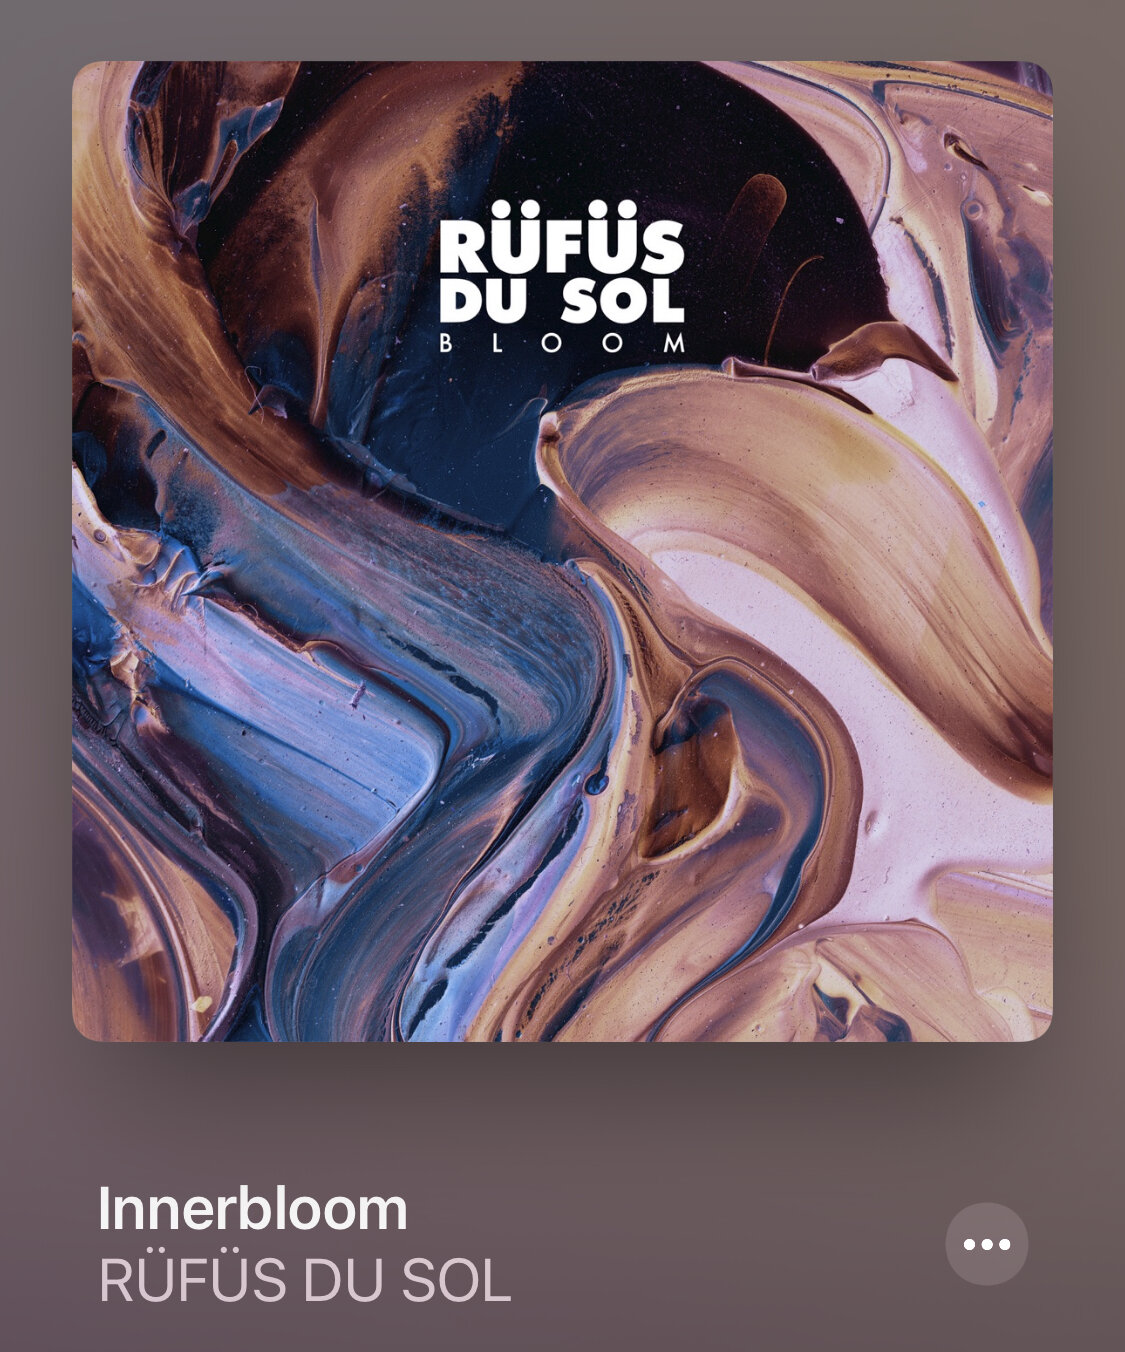  There is something so ethereal about Rufüs. I first heard their single “Sundream” at a juice bar in Melbourne, Australia. Their music is perfect for summers by the pool. Among my life goals is to one day produce a runway show, with models strutting 